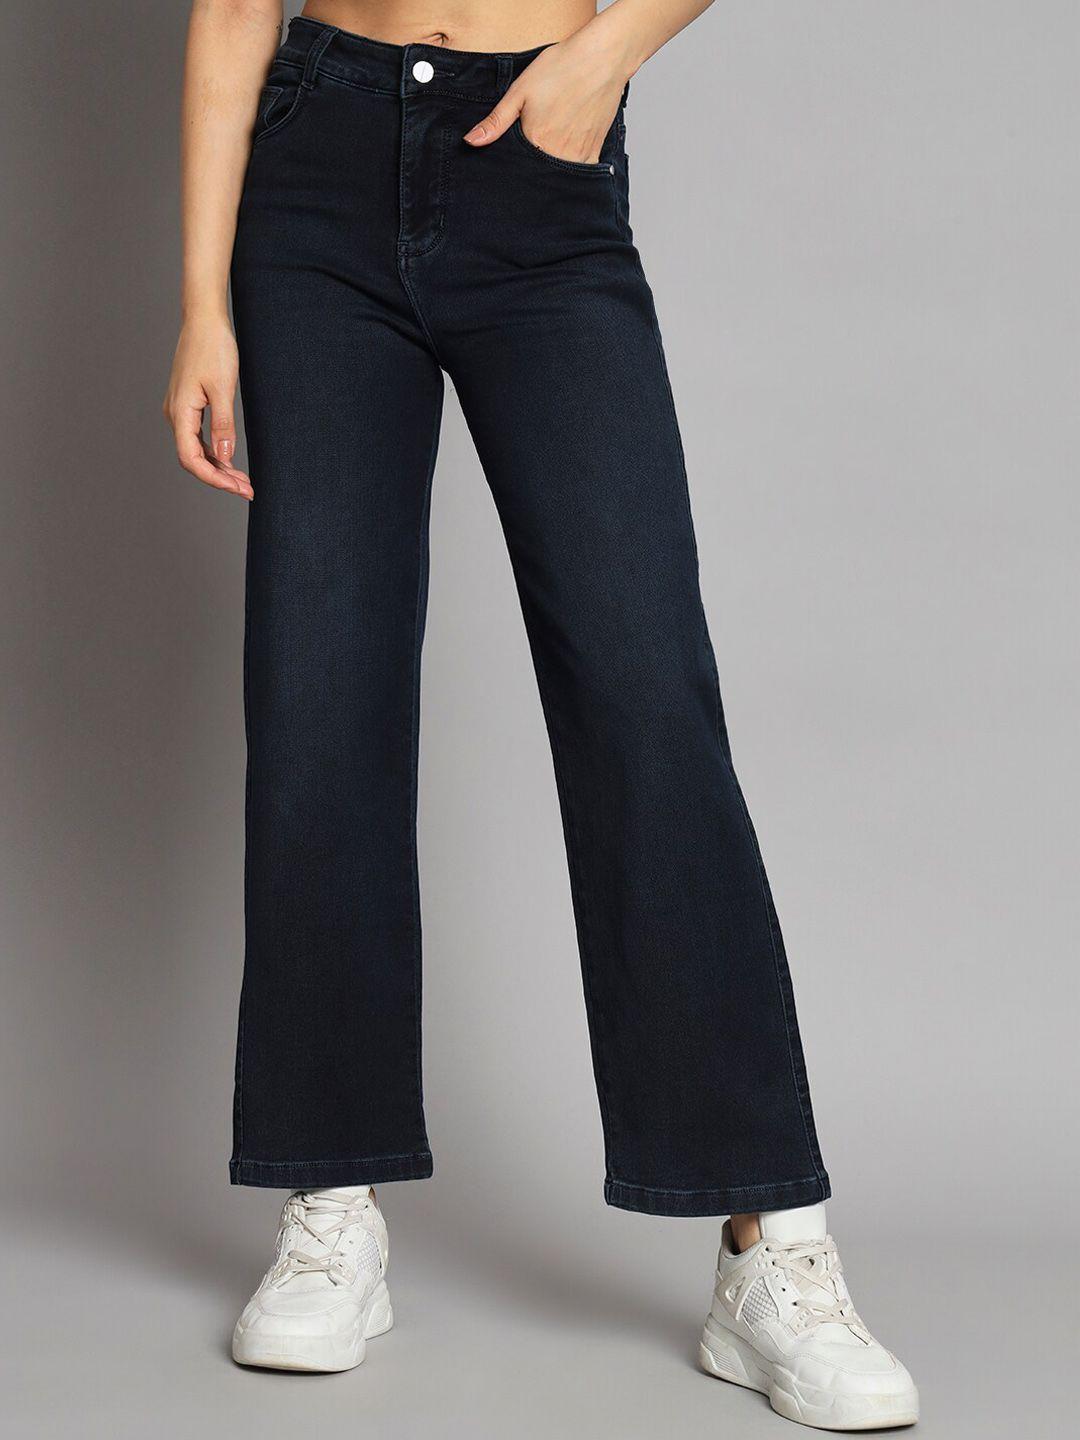 broowl-women-pop-flared-mid-rise-clean-look-stretchable-jeans